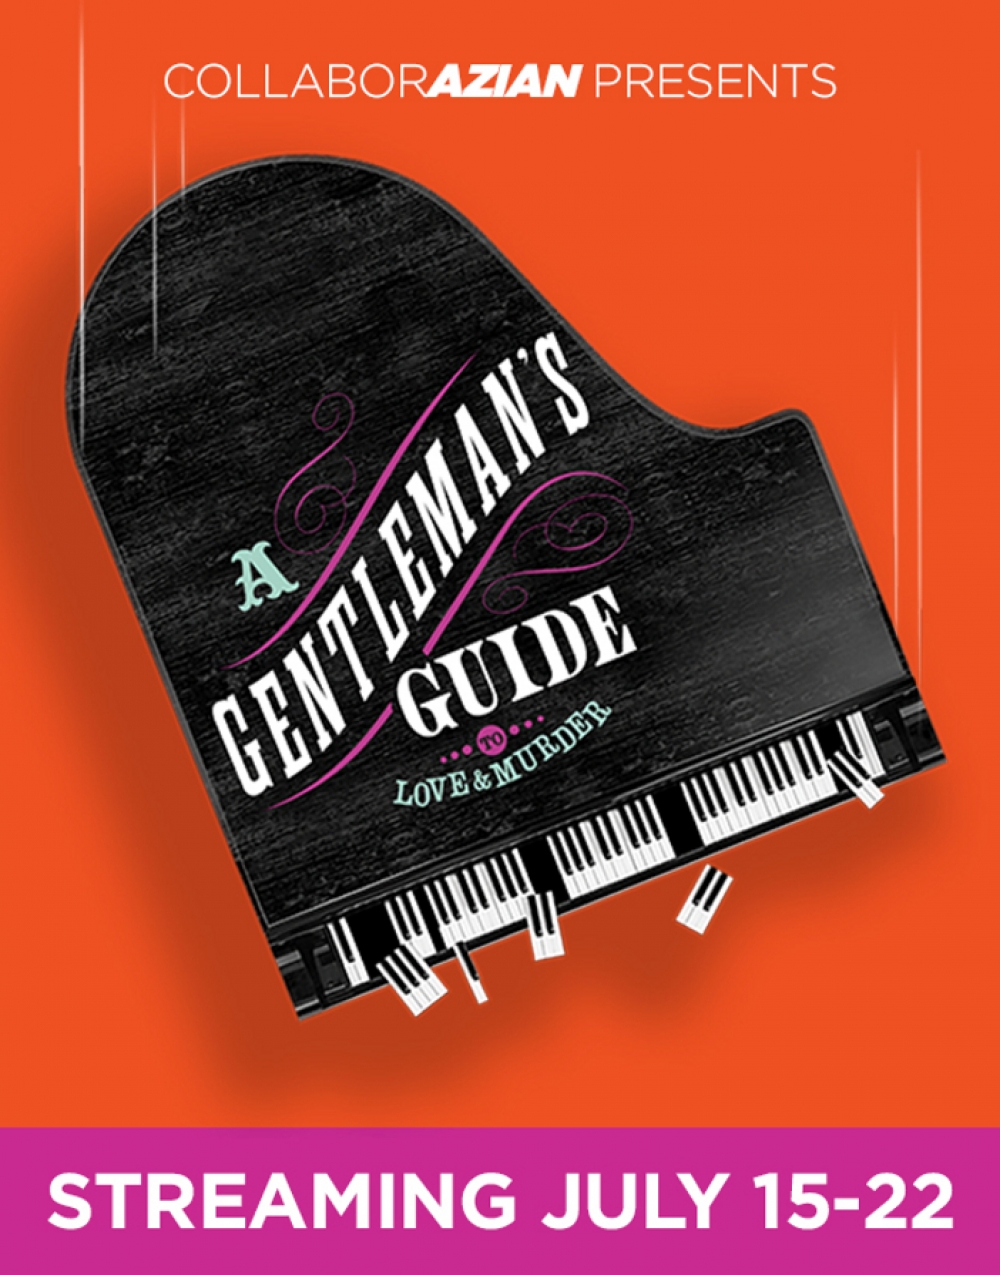 A Gentleman's Guide to Love & Murder at CollaborAzian